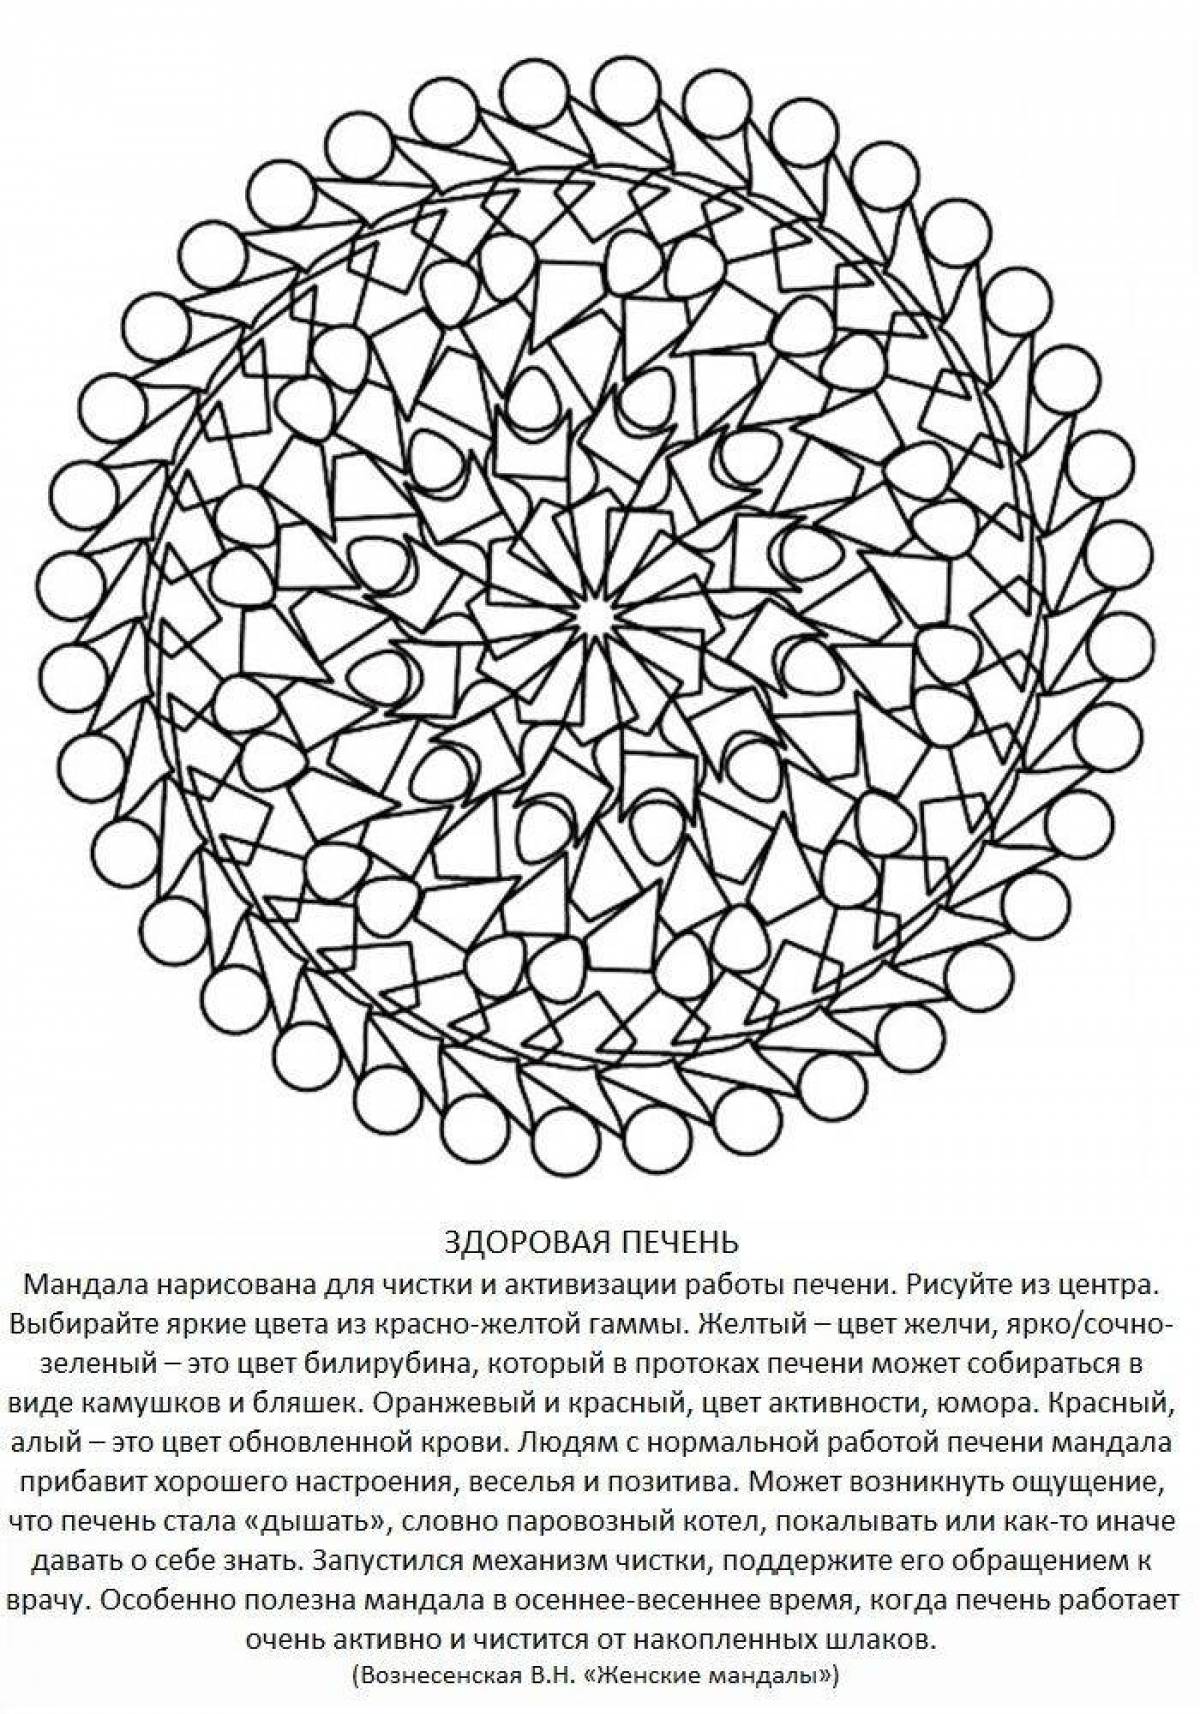 Sparkly mandala coloring pages with meaning